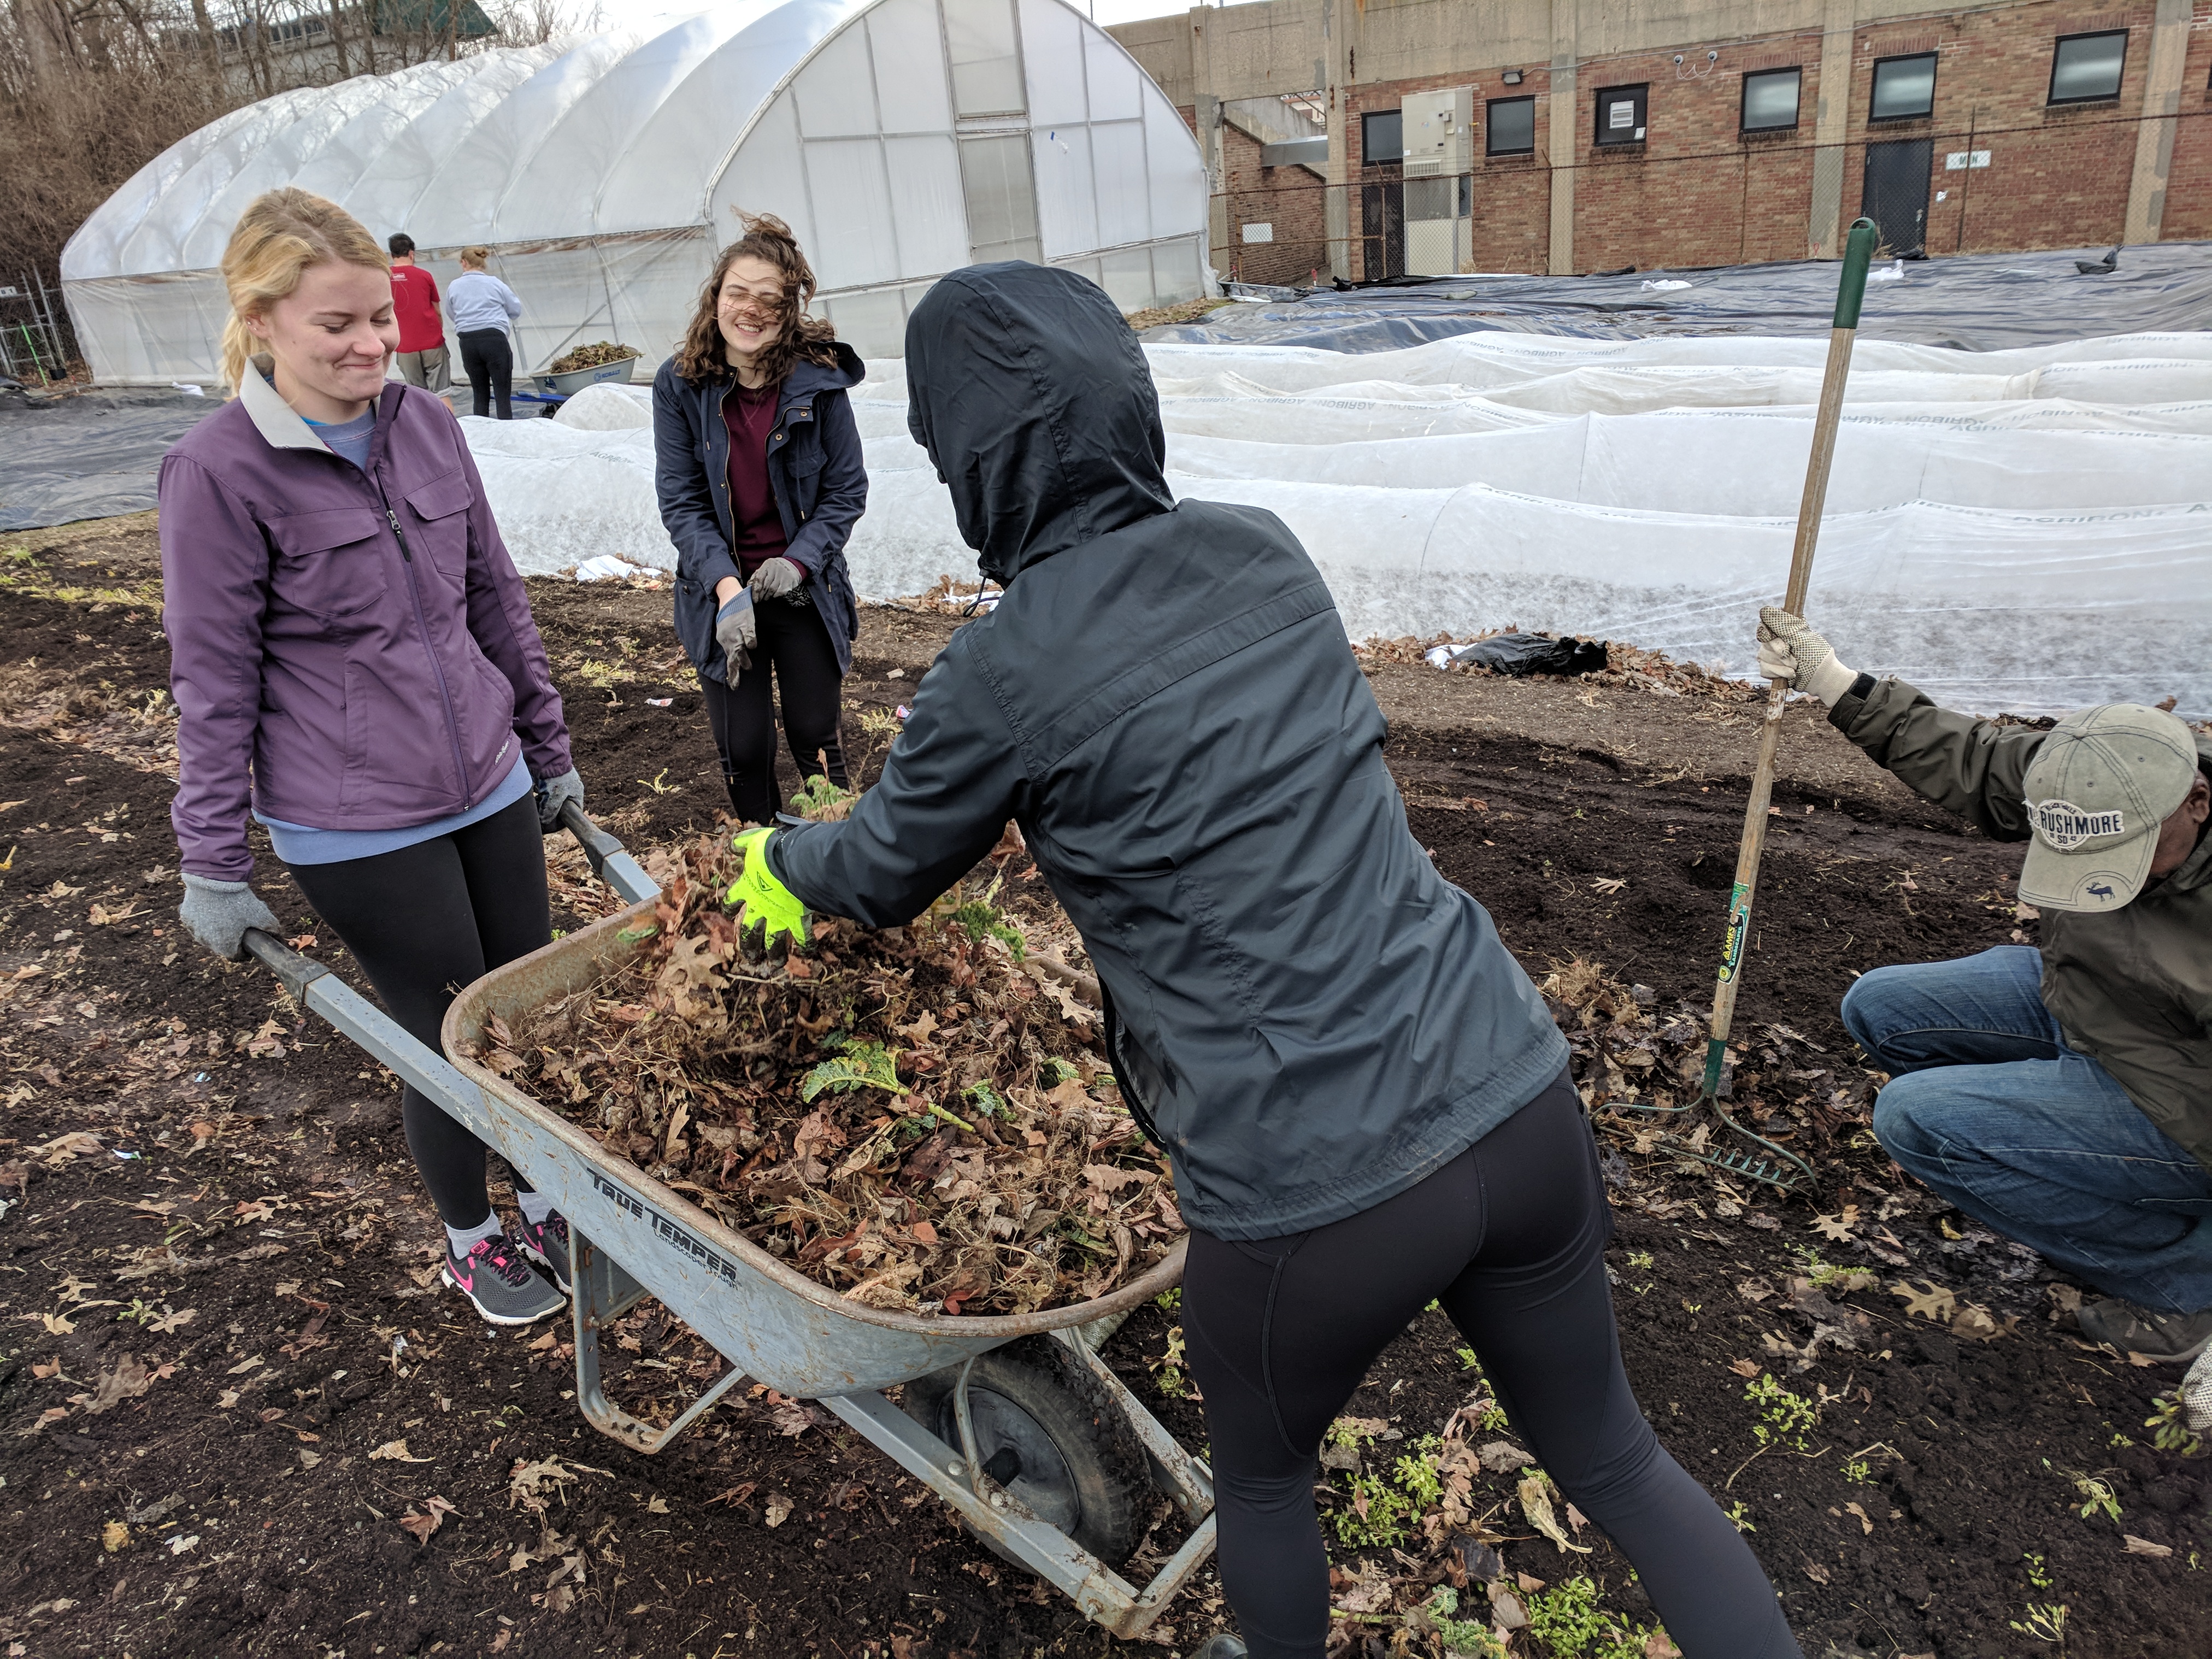 Students are clearing off the beds from any leaves or debris and transporting it to a compost.